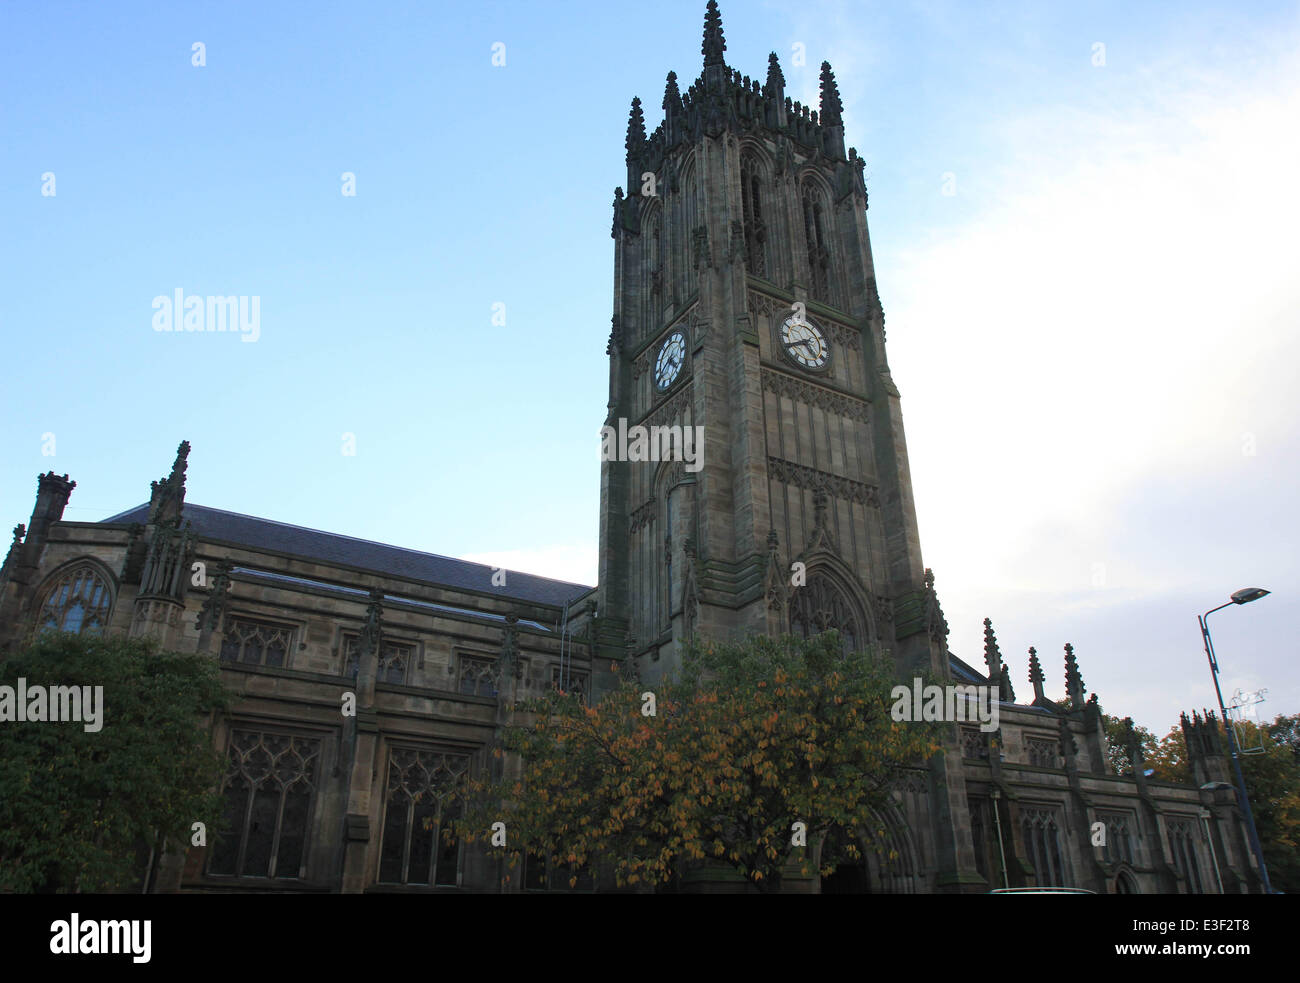 Memorial service in honour of Emmerdale actor Richard Thorpe held at Leeds Minster. Cast members, past and present, attented the ceremony to pay their respects  Where: Leeds, Yorkshire, United Kingdom When: 25 Oct 2013 Stock Photo